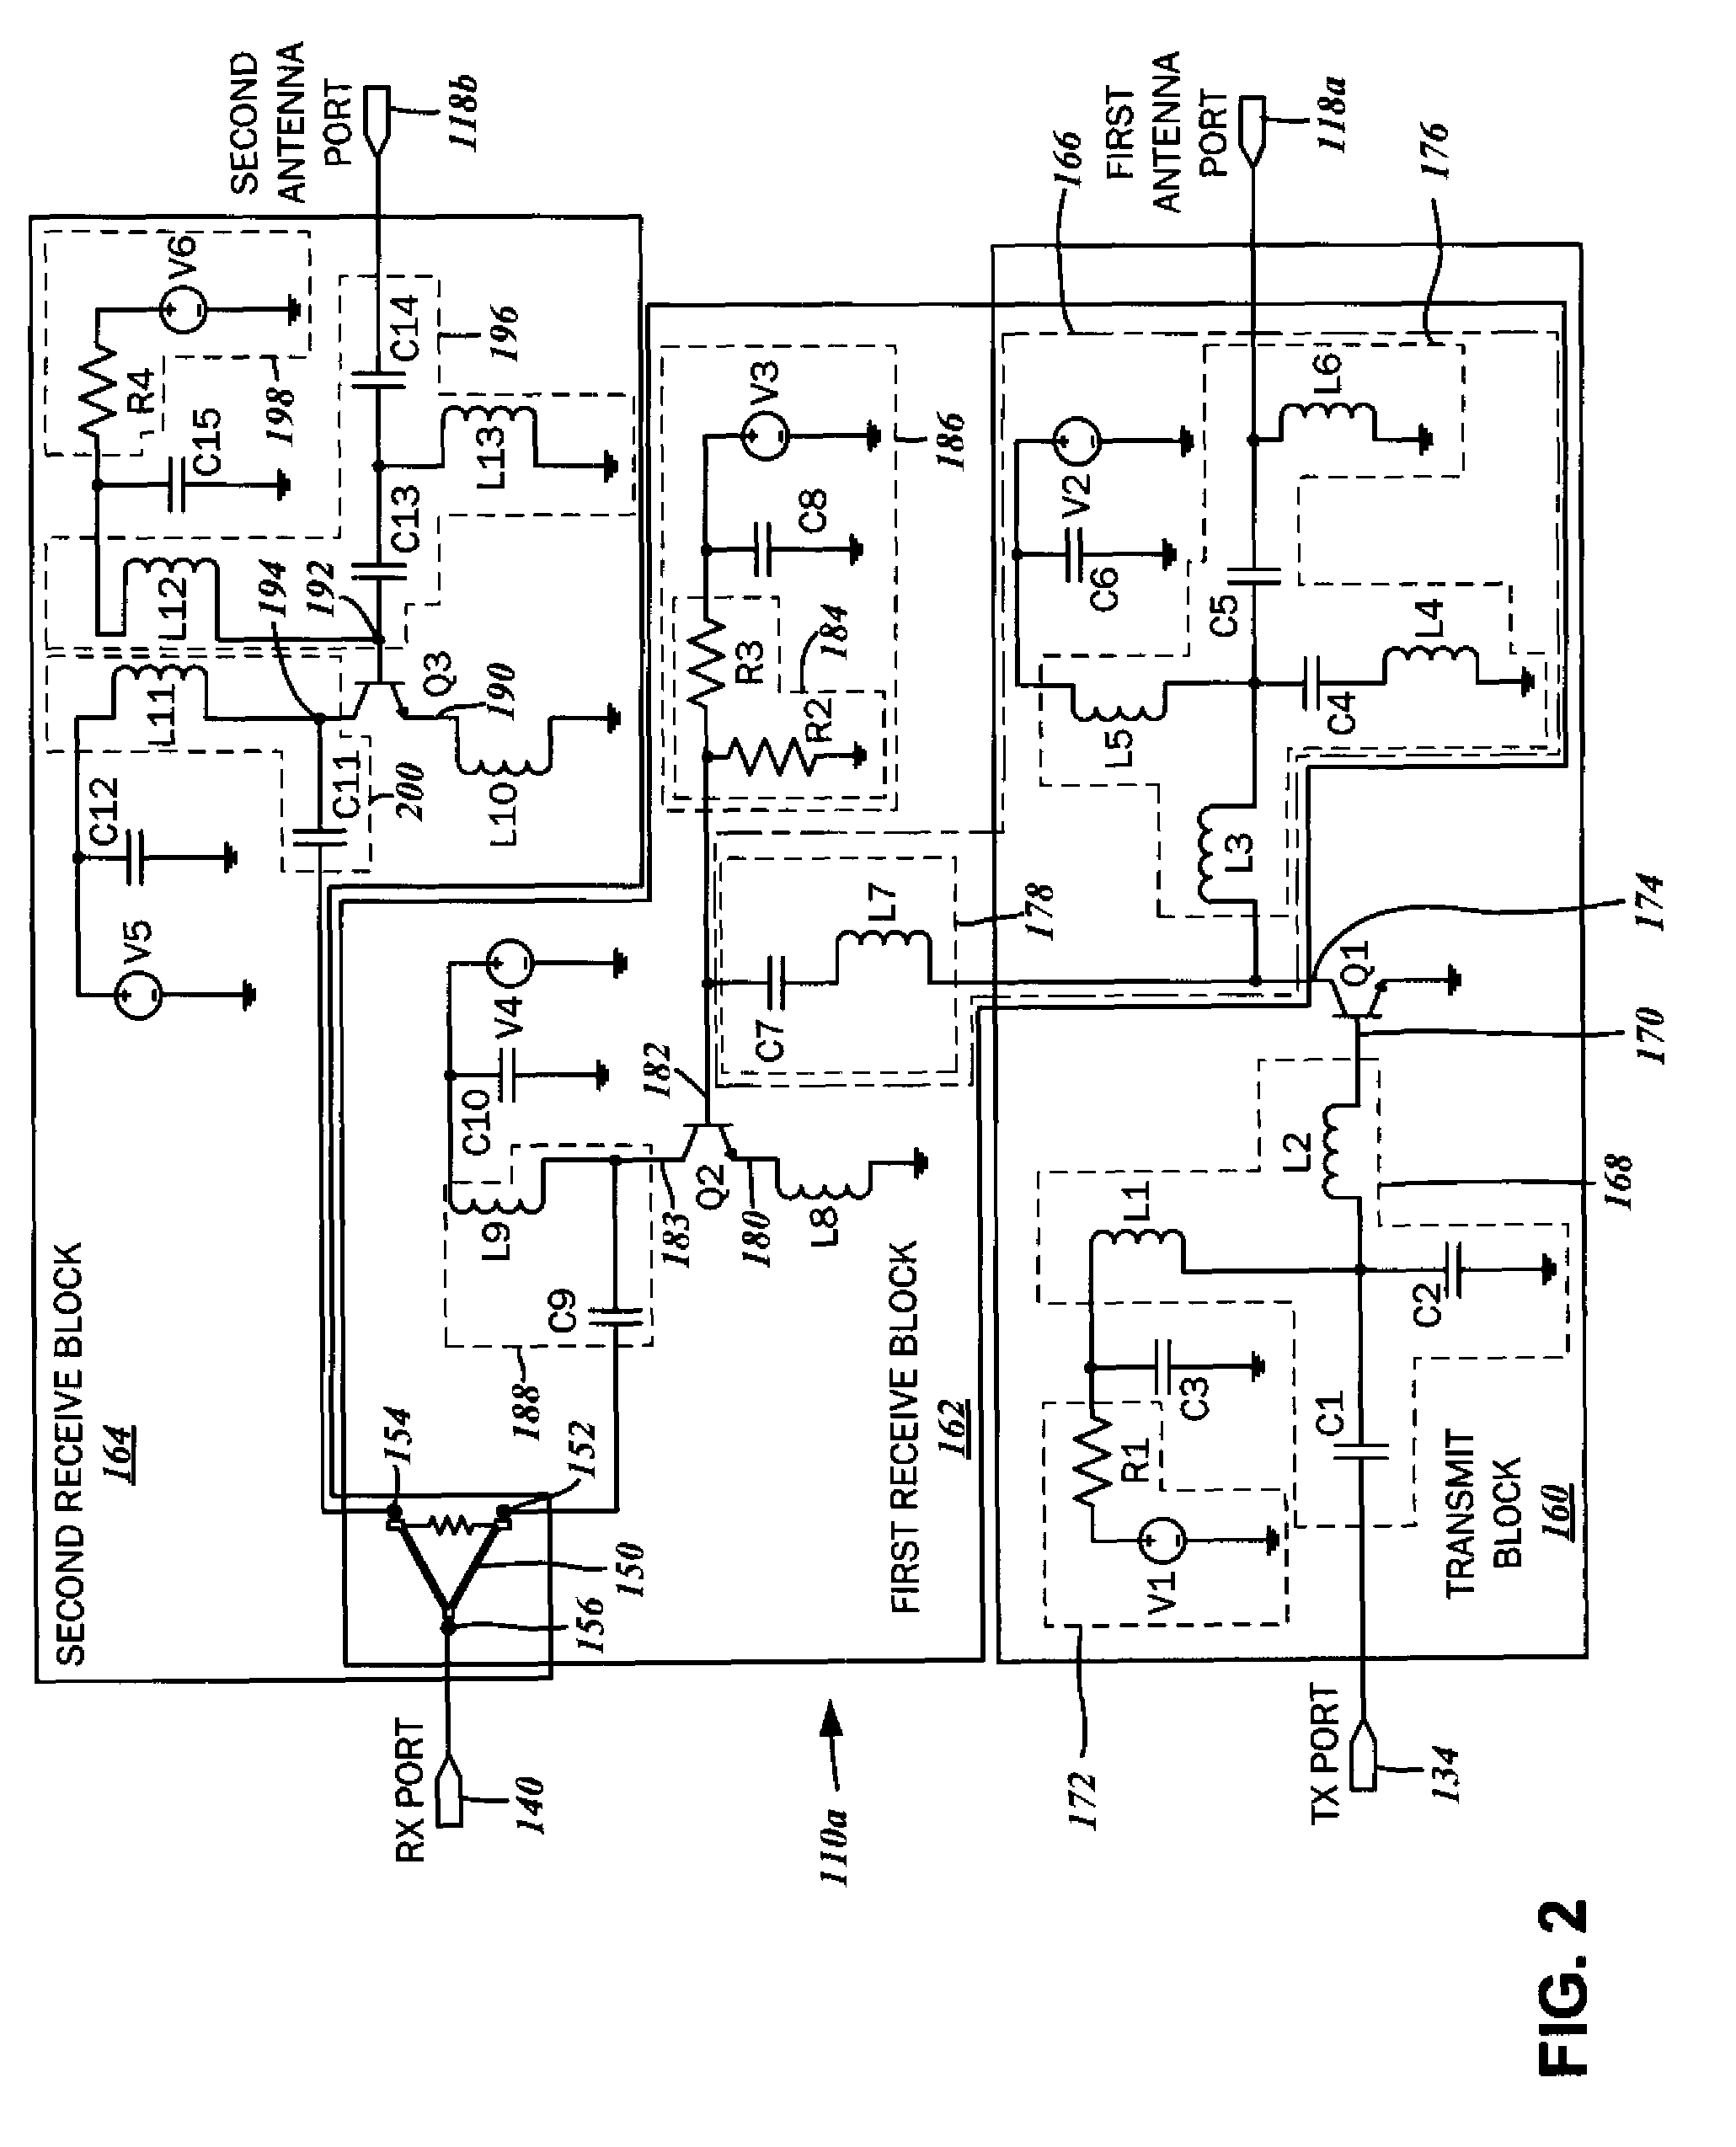 Radio frequency front end circuit with antenna diversity for multipath mitigation